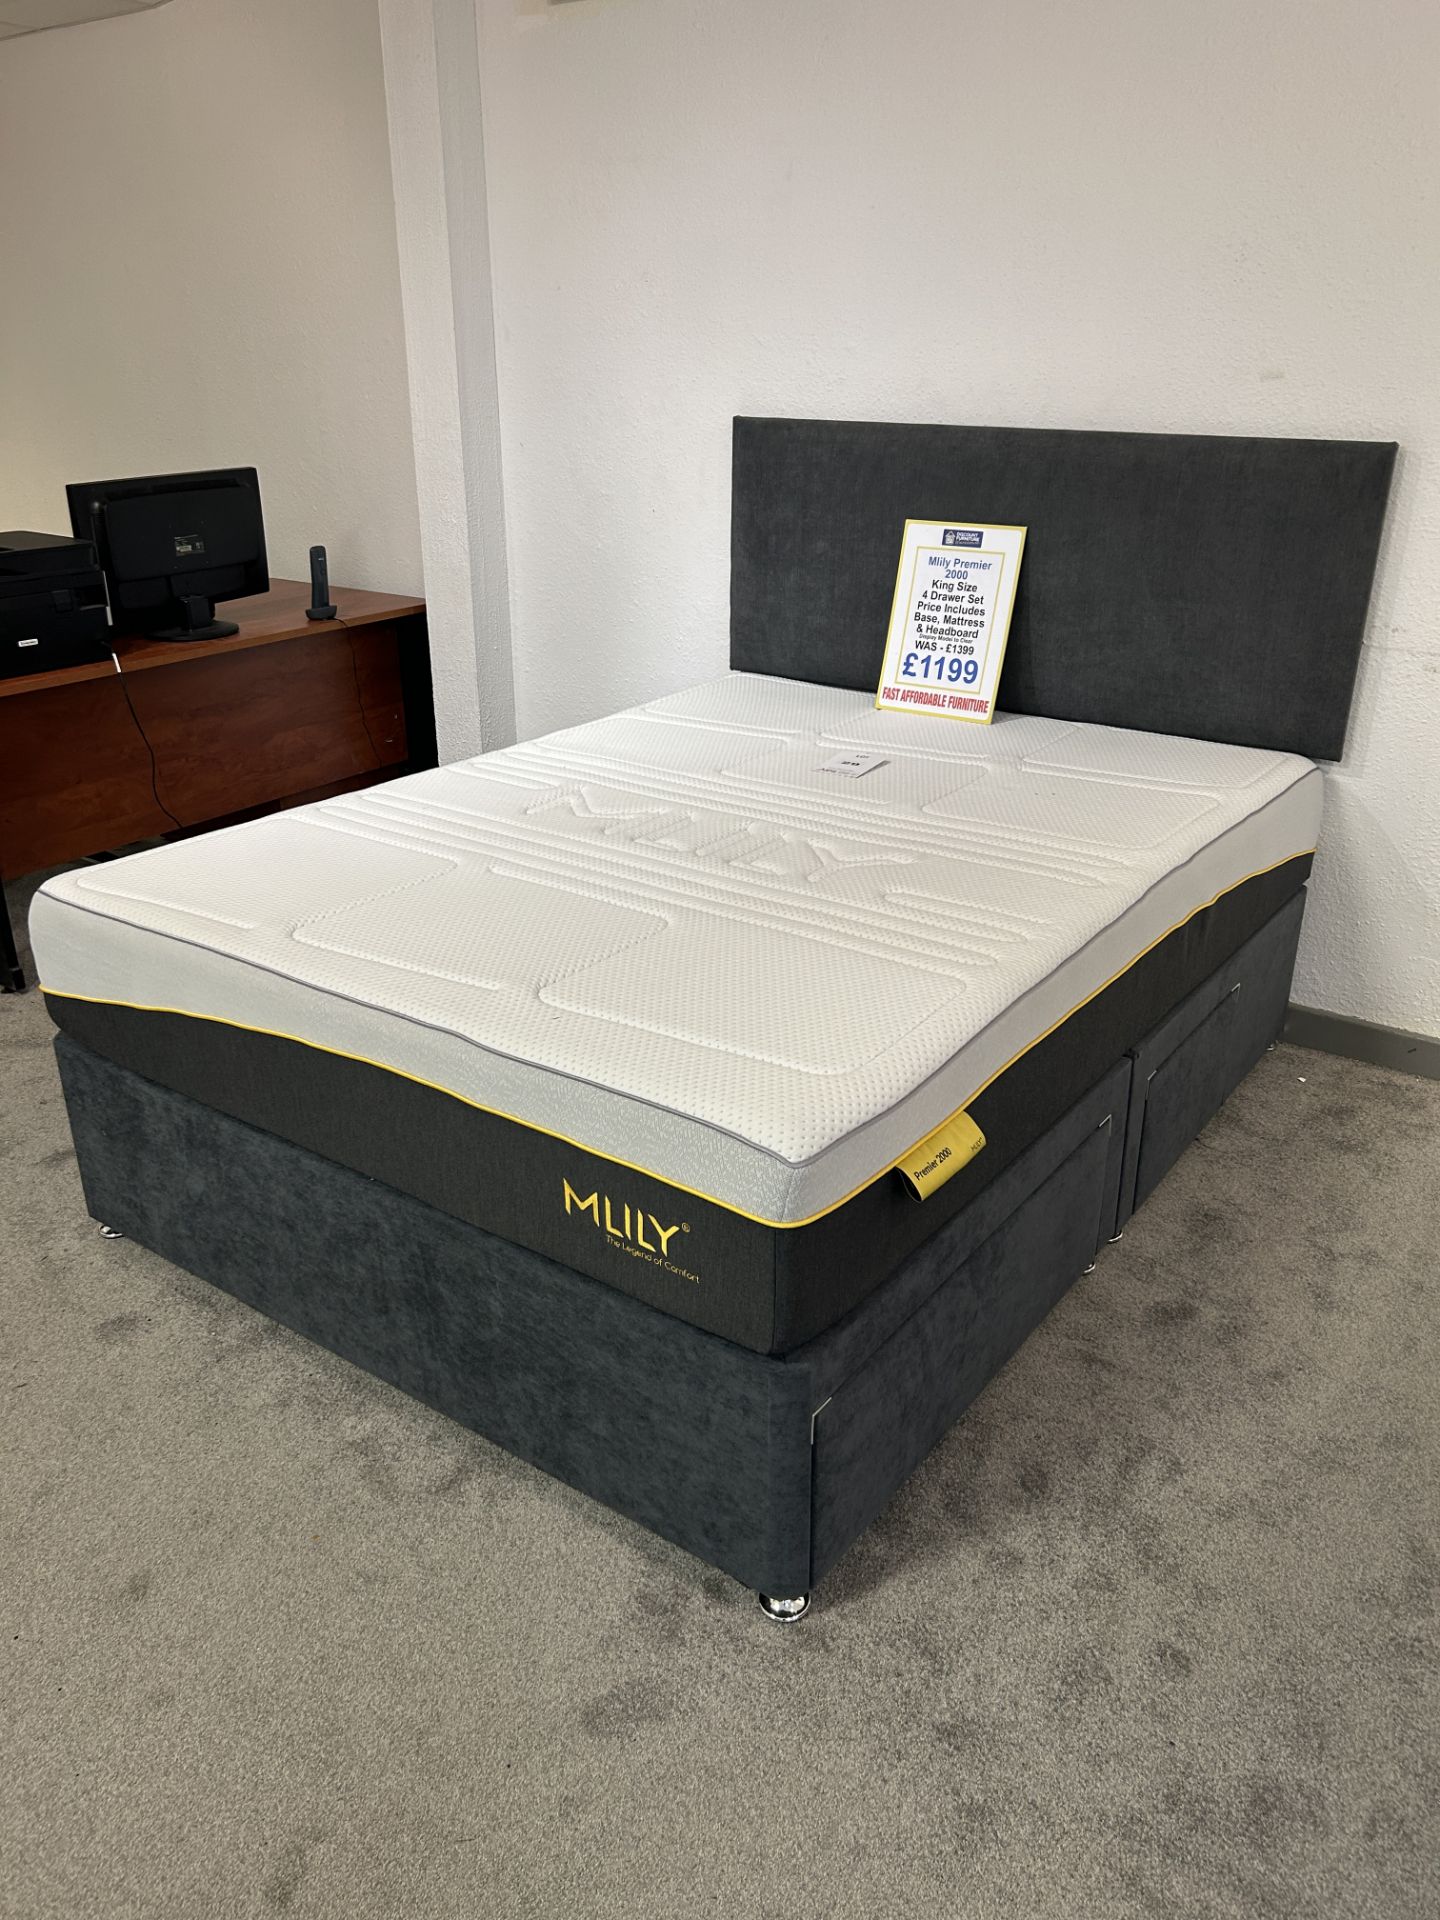 Ex-Display King Size 2 Drawer Bed Set incl: MLily Premier 2000 Mattress, Base & Headboard | RRP £1,3 - Image 2 of 4